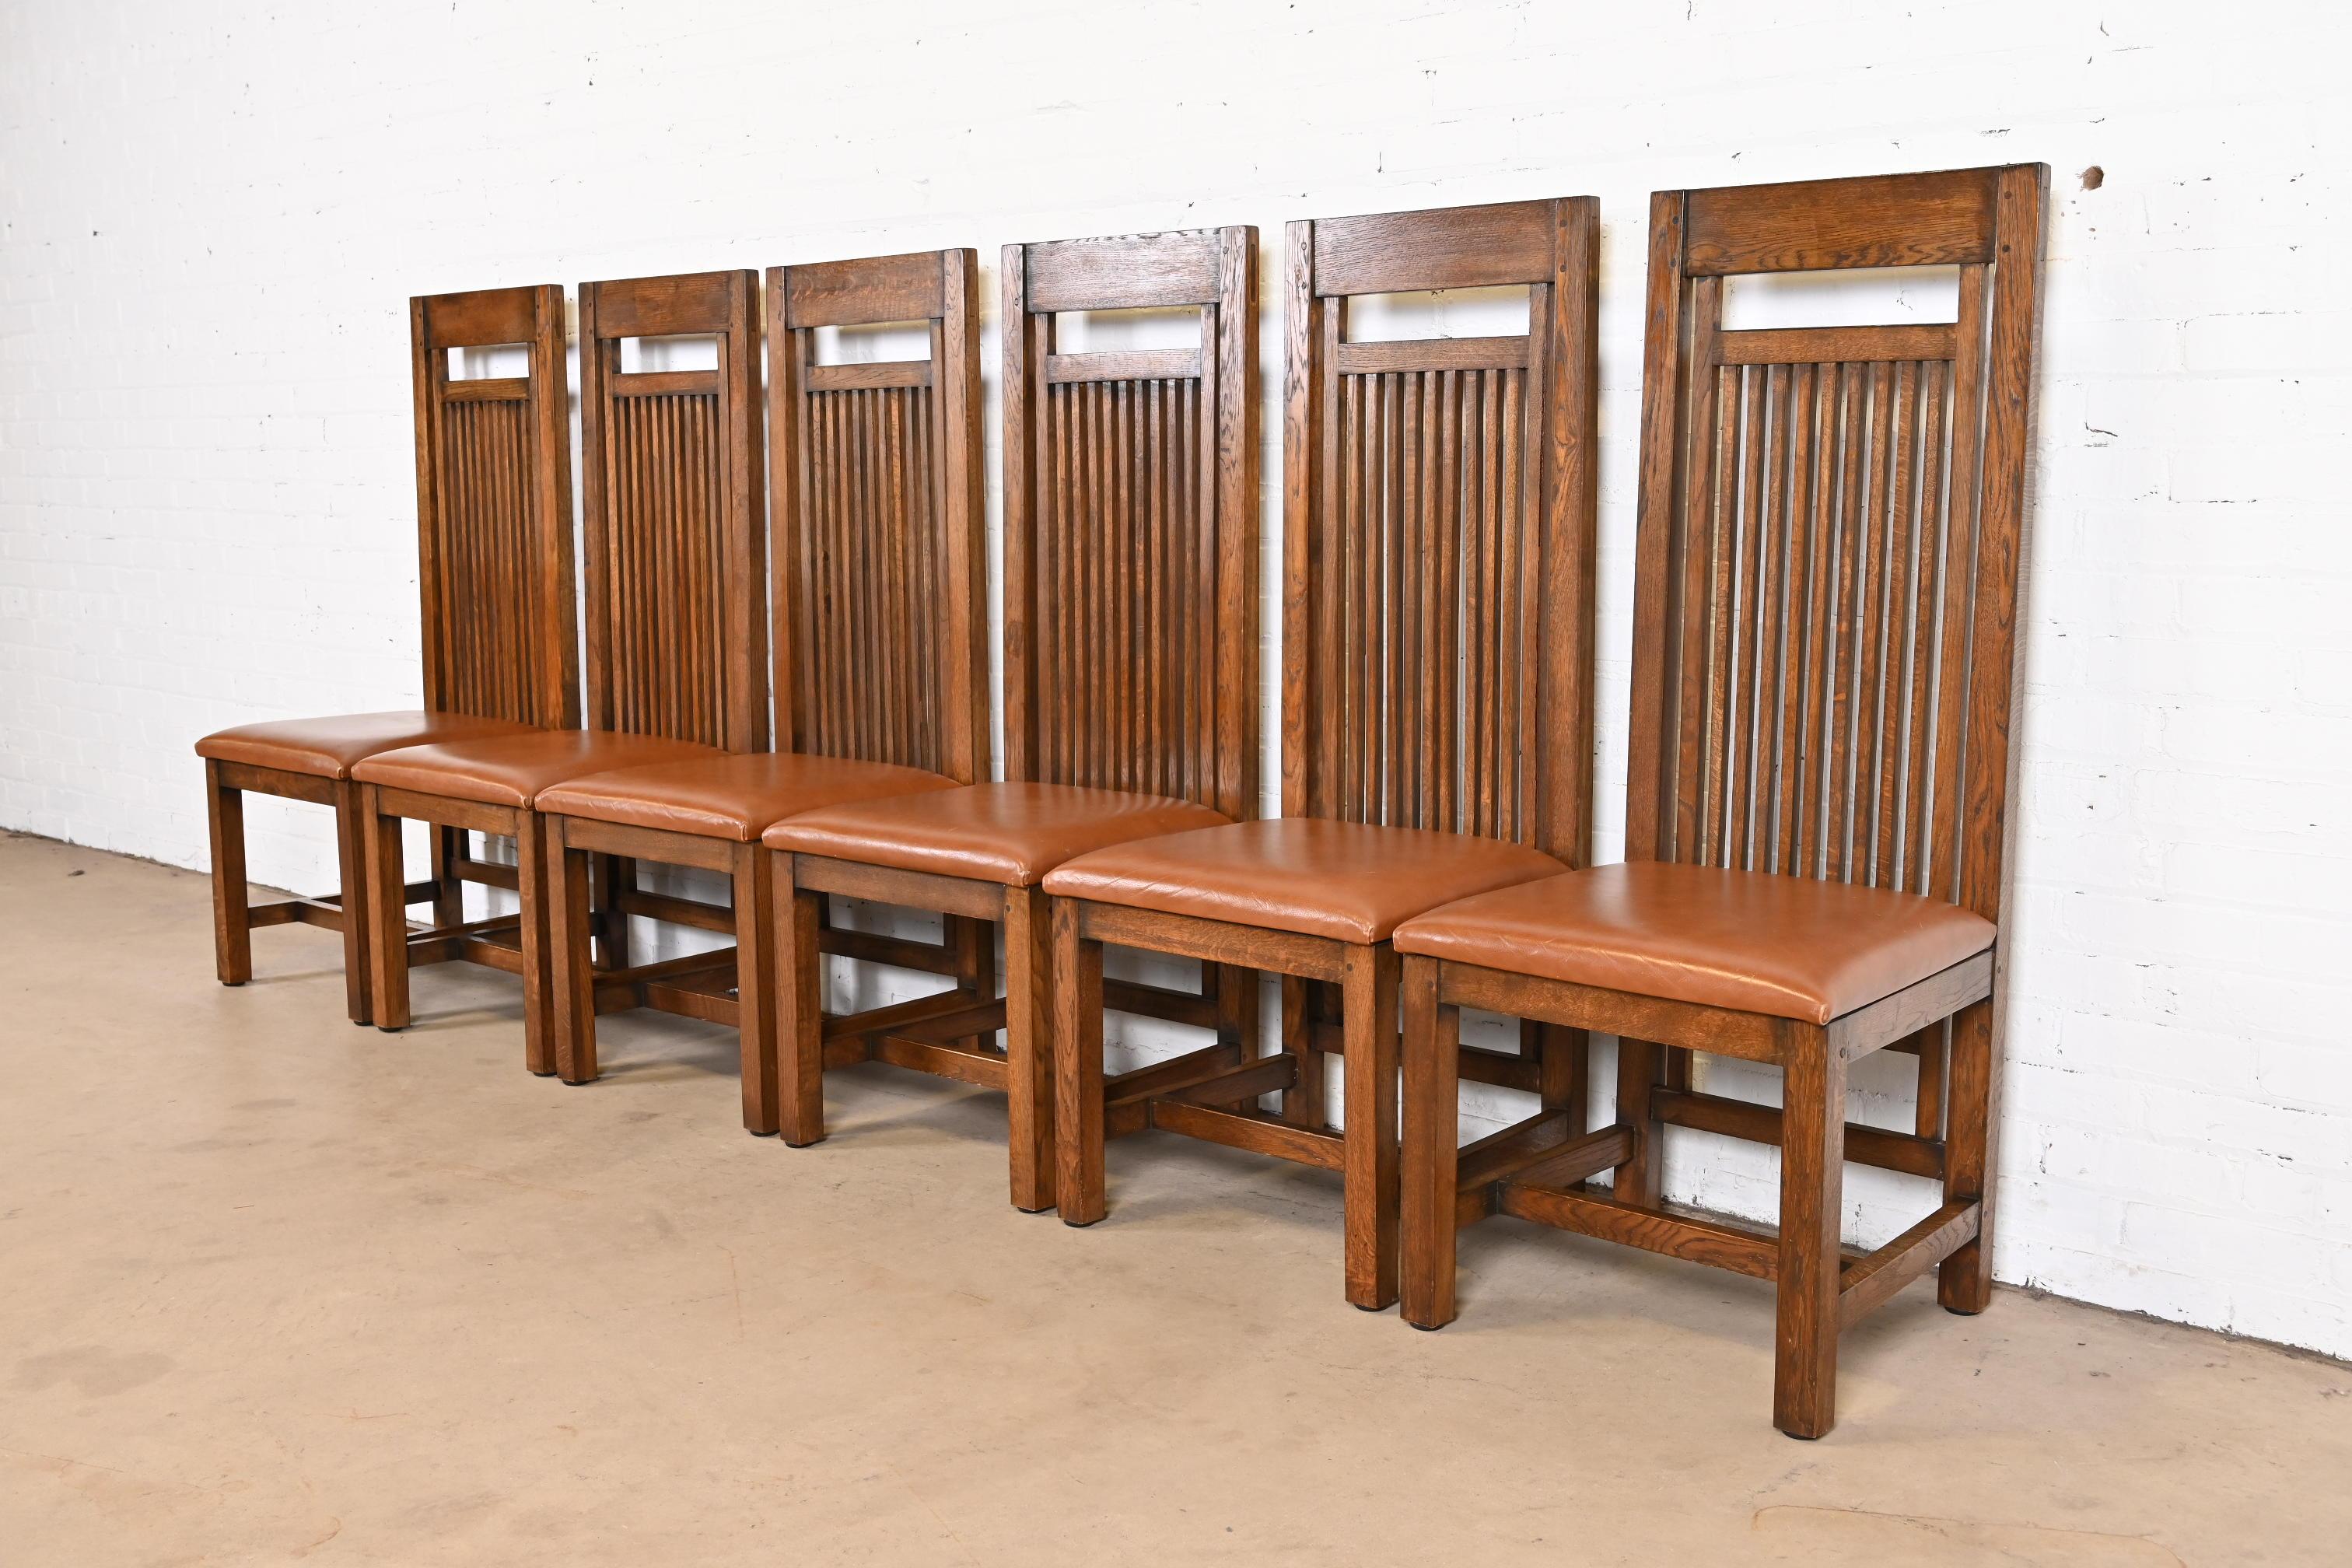 American Frank Lloyd Wright Arts & Crafts Oak and Leather High Back Dining Chairs